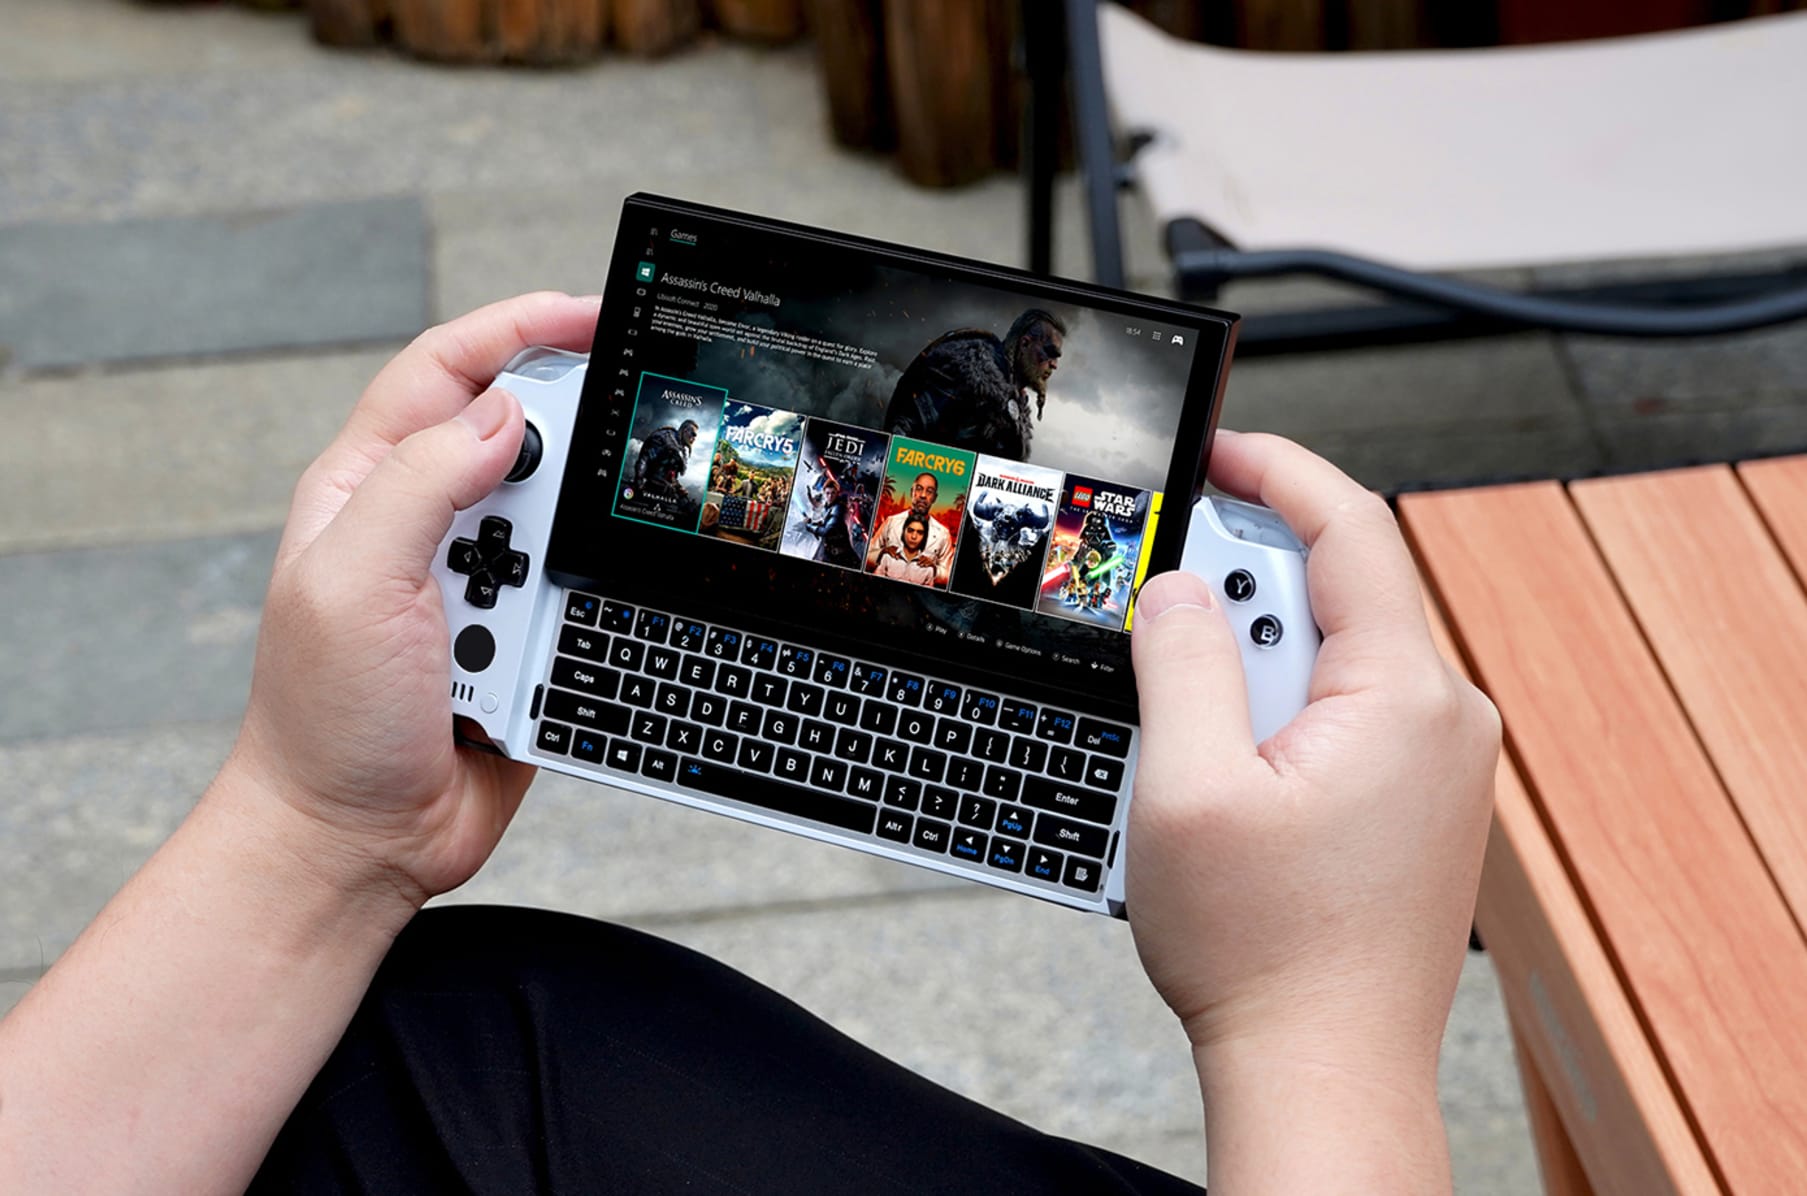 GPD Win 4 is a nod to the past of ultra-mobile PCs - Yanko Design